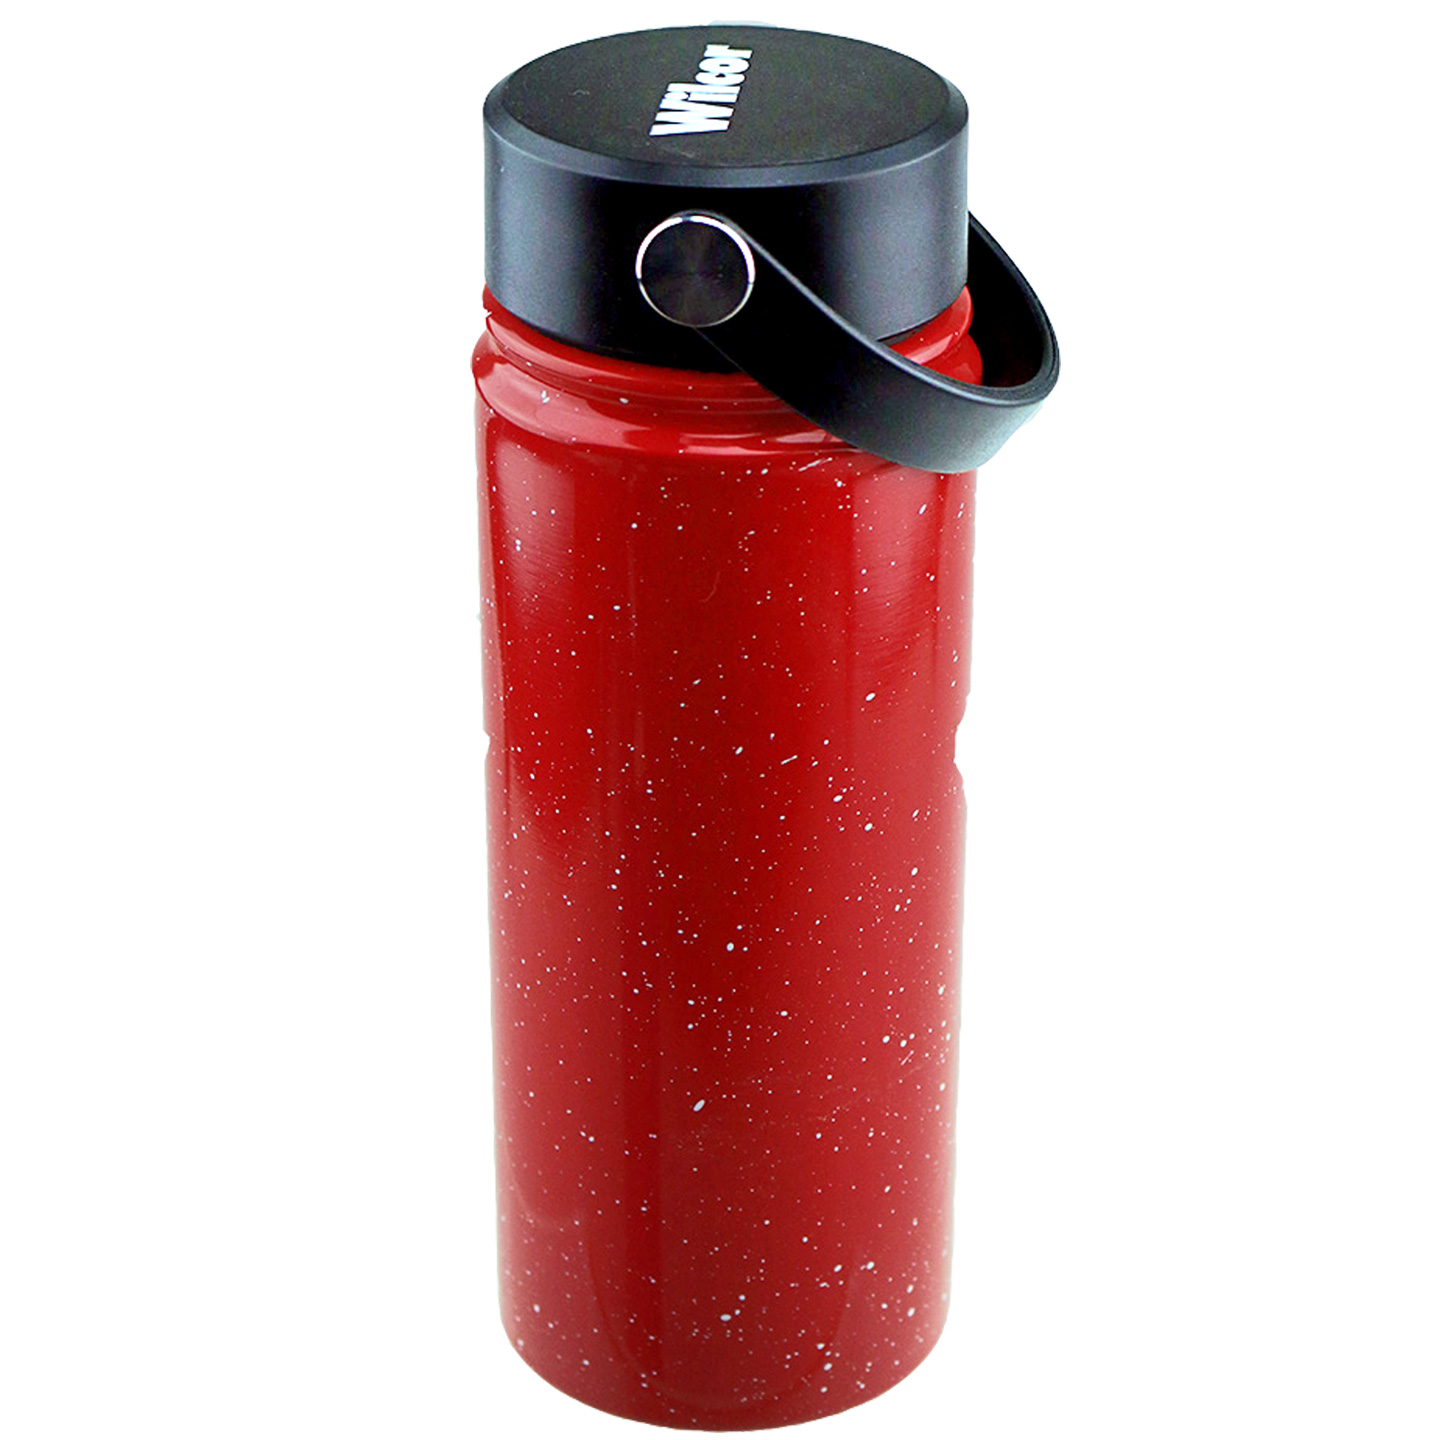 https://wilcor.net/productimages/cmp0730_stainless_vacuum_bottle_blue_red_12dsp_rd.jpg